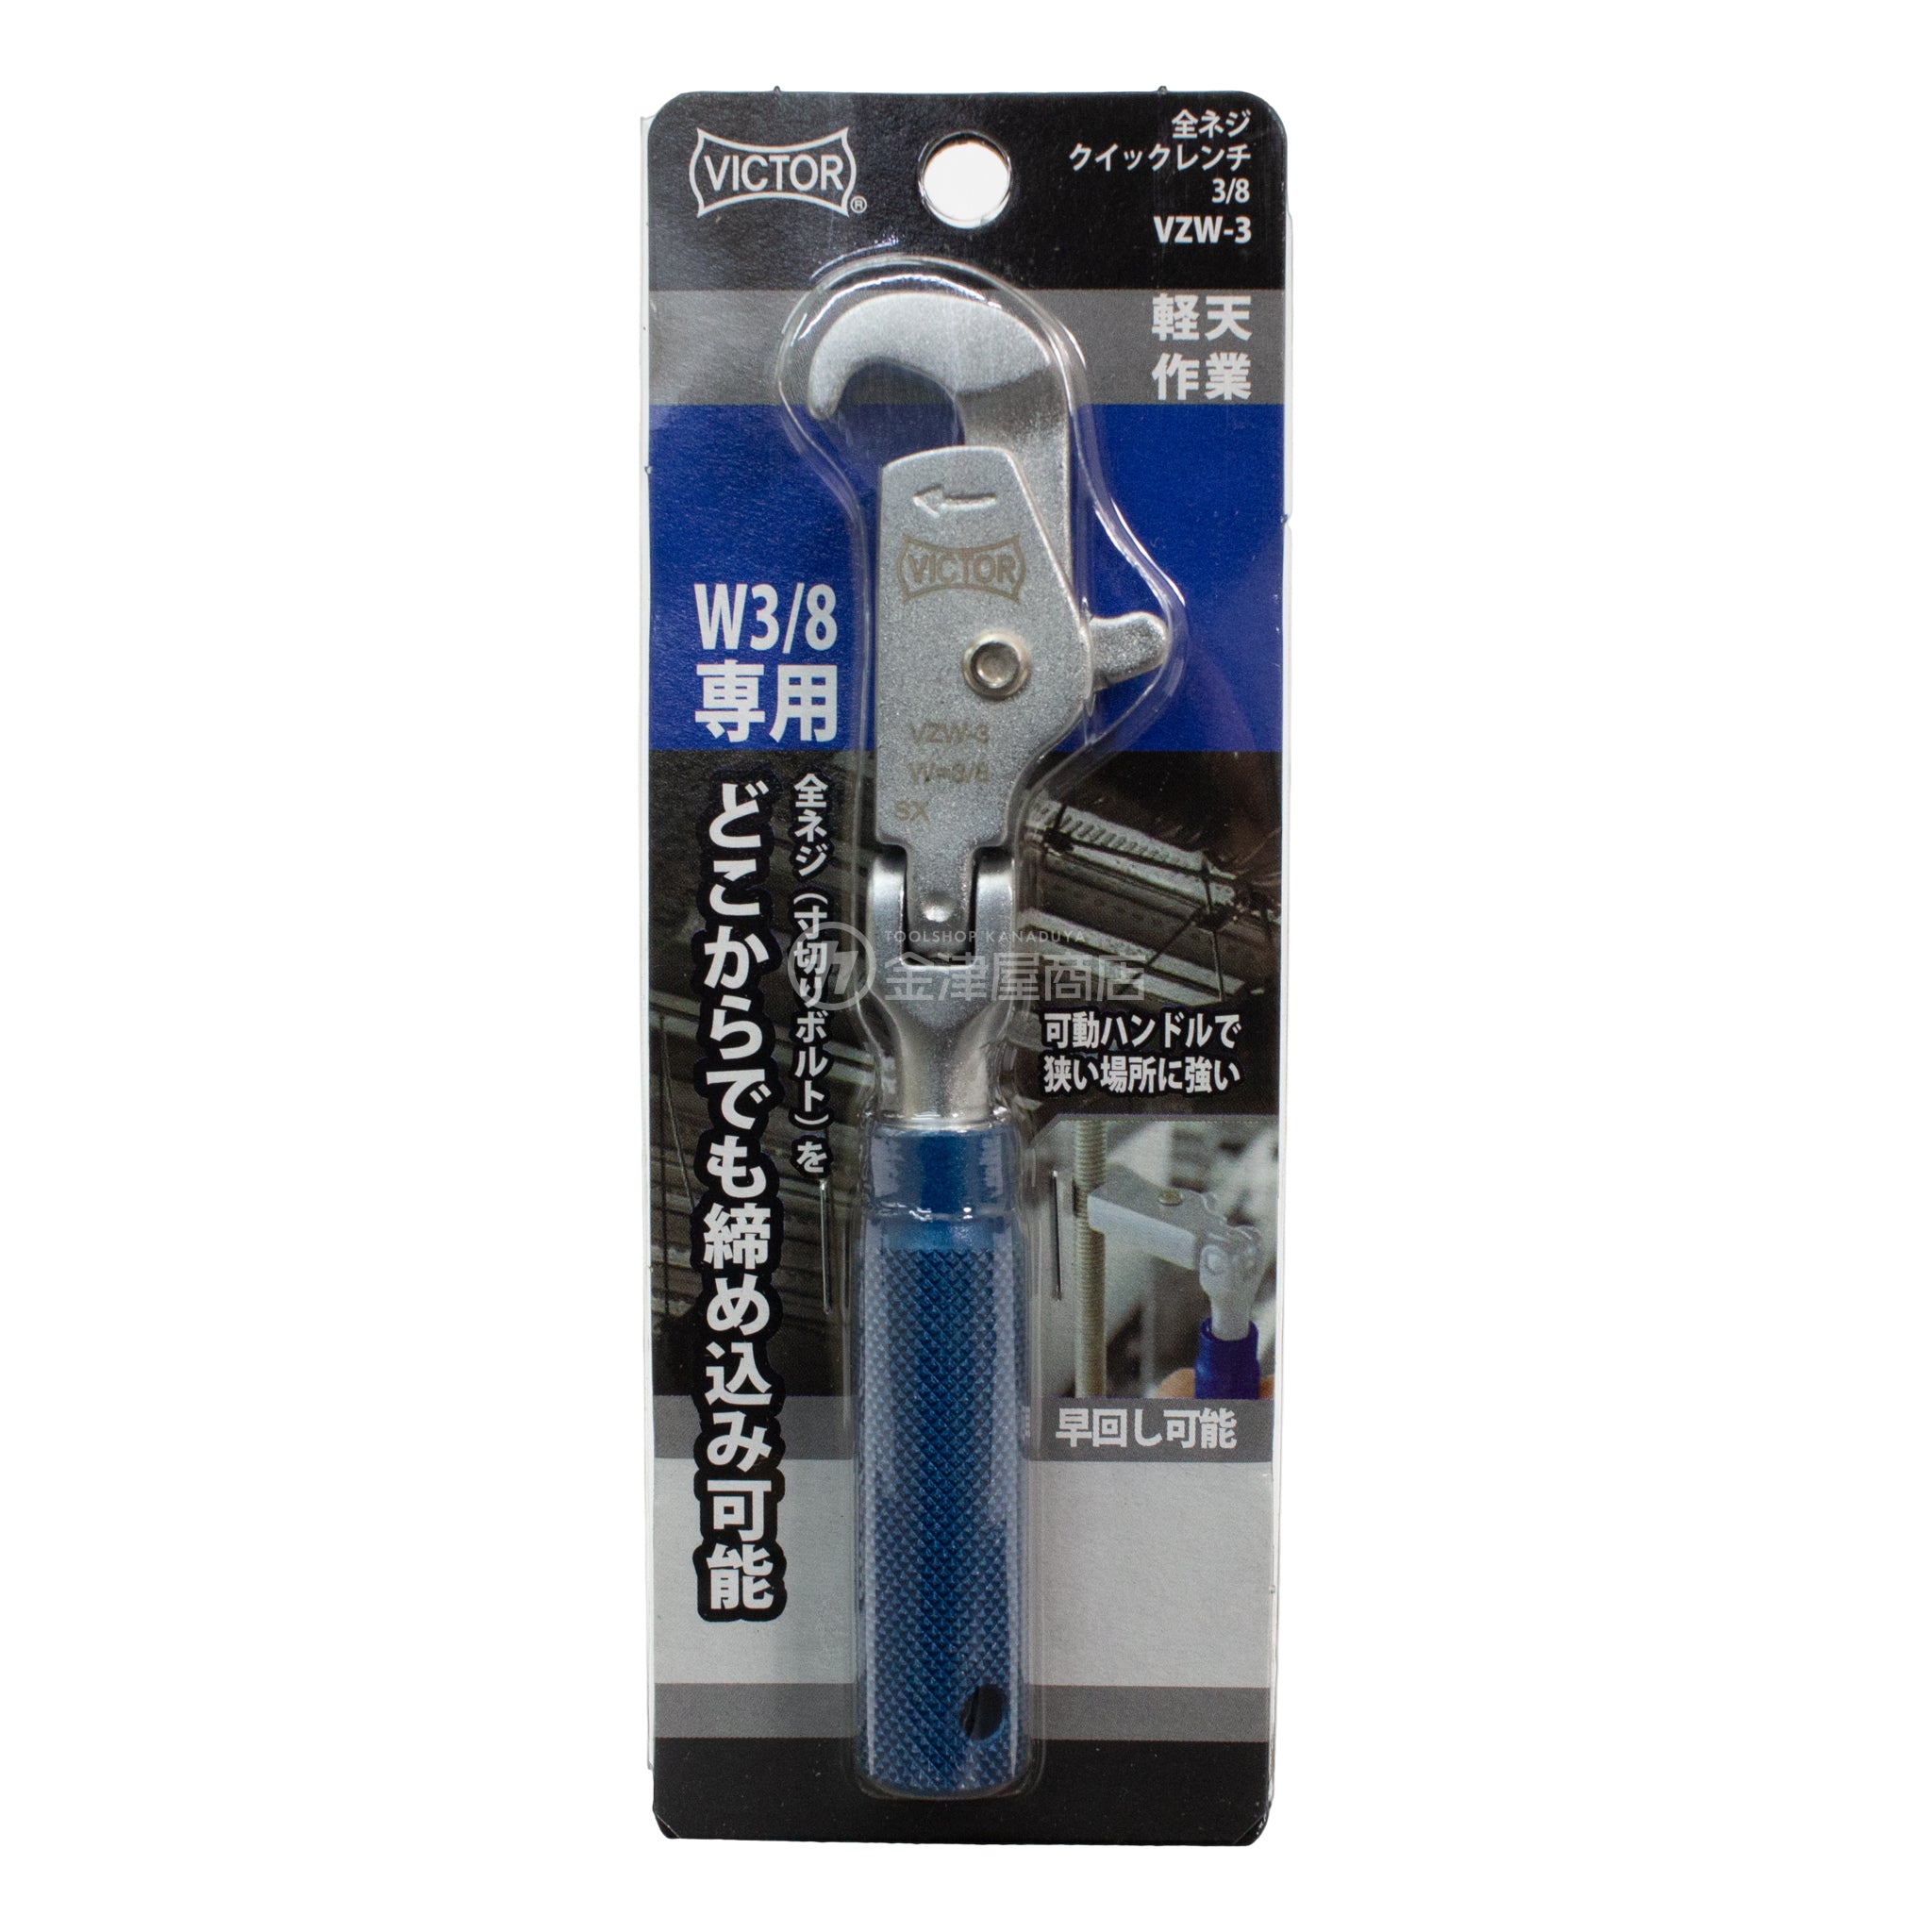 CD Wrench Overflow VICL62718 VICTOR レンタル落ち /00110